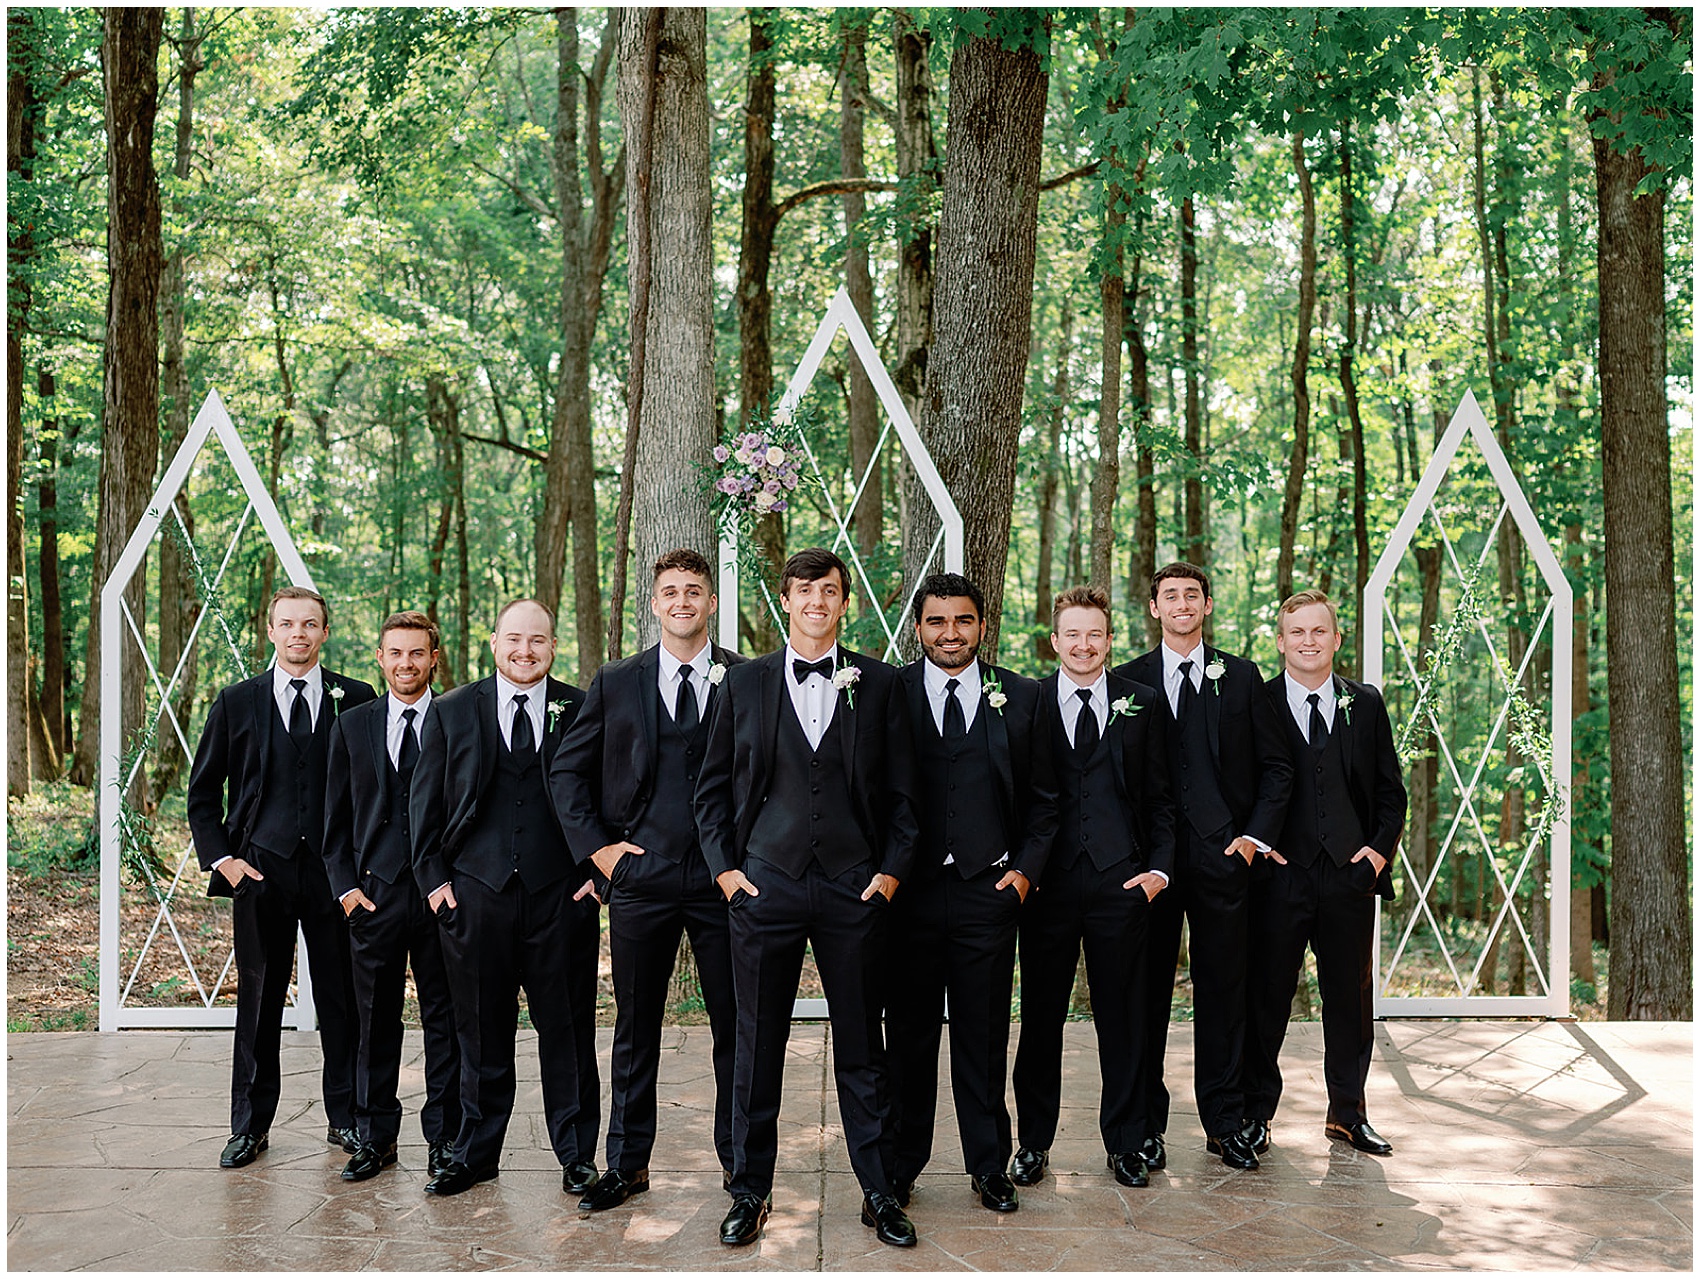 A groom in a black tuxedo stands with hands in his pockets with his matching groomsmen